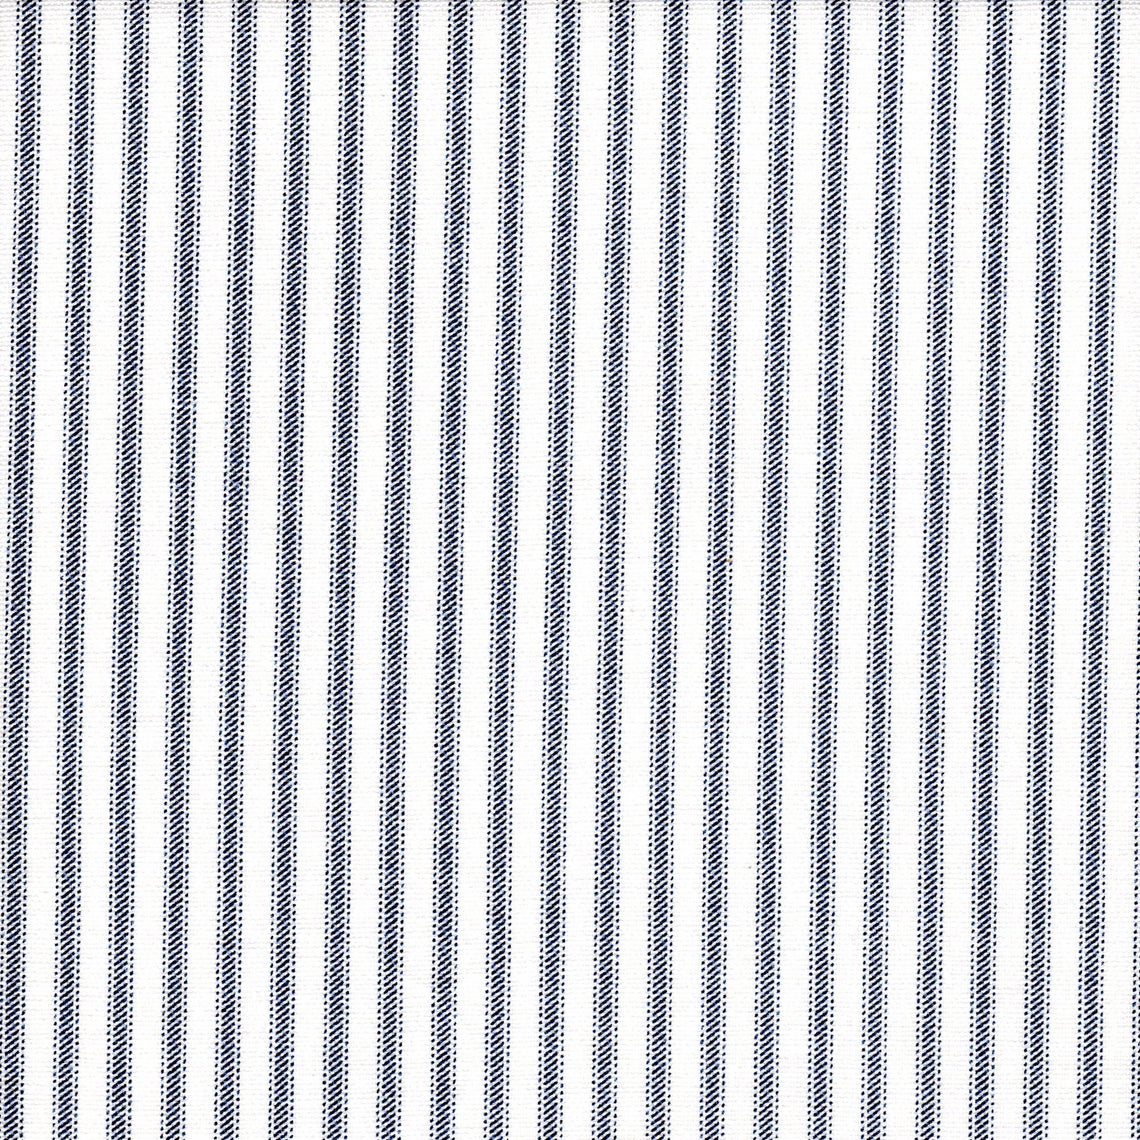 pinch pleated curtain panels pair in classic navy blue ticking stripe on white